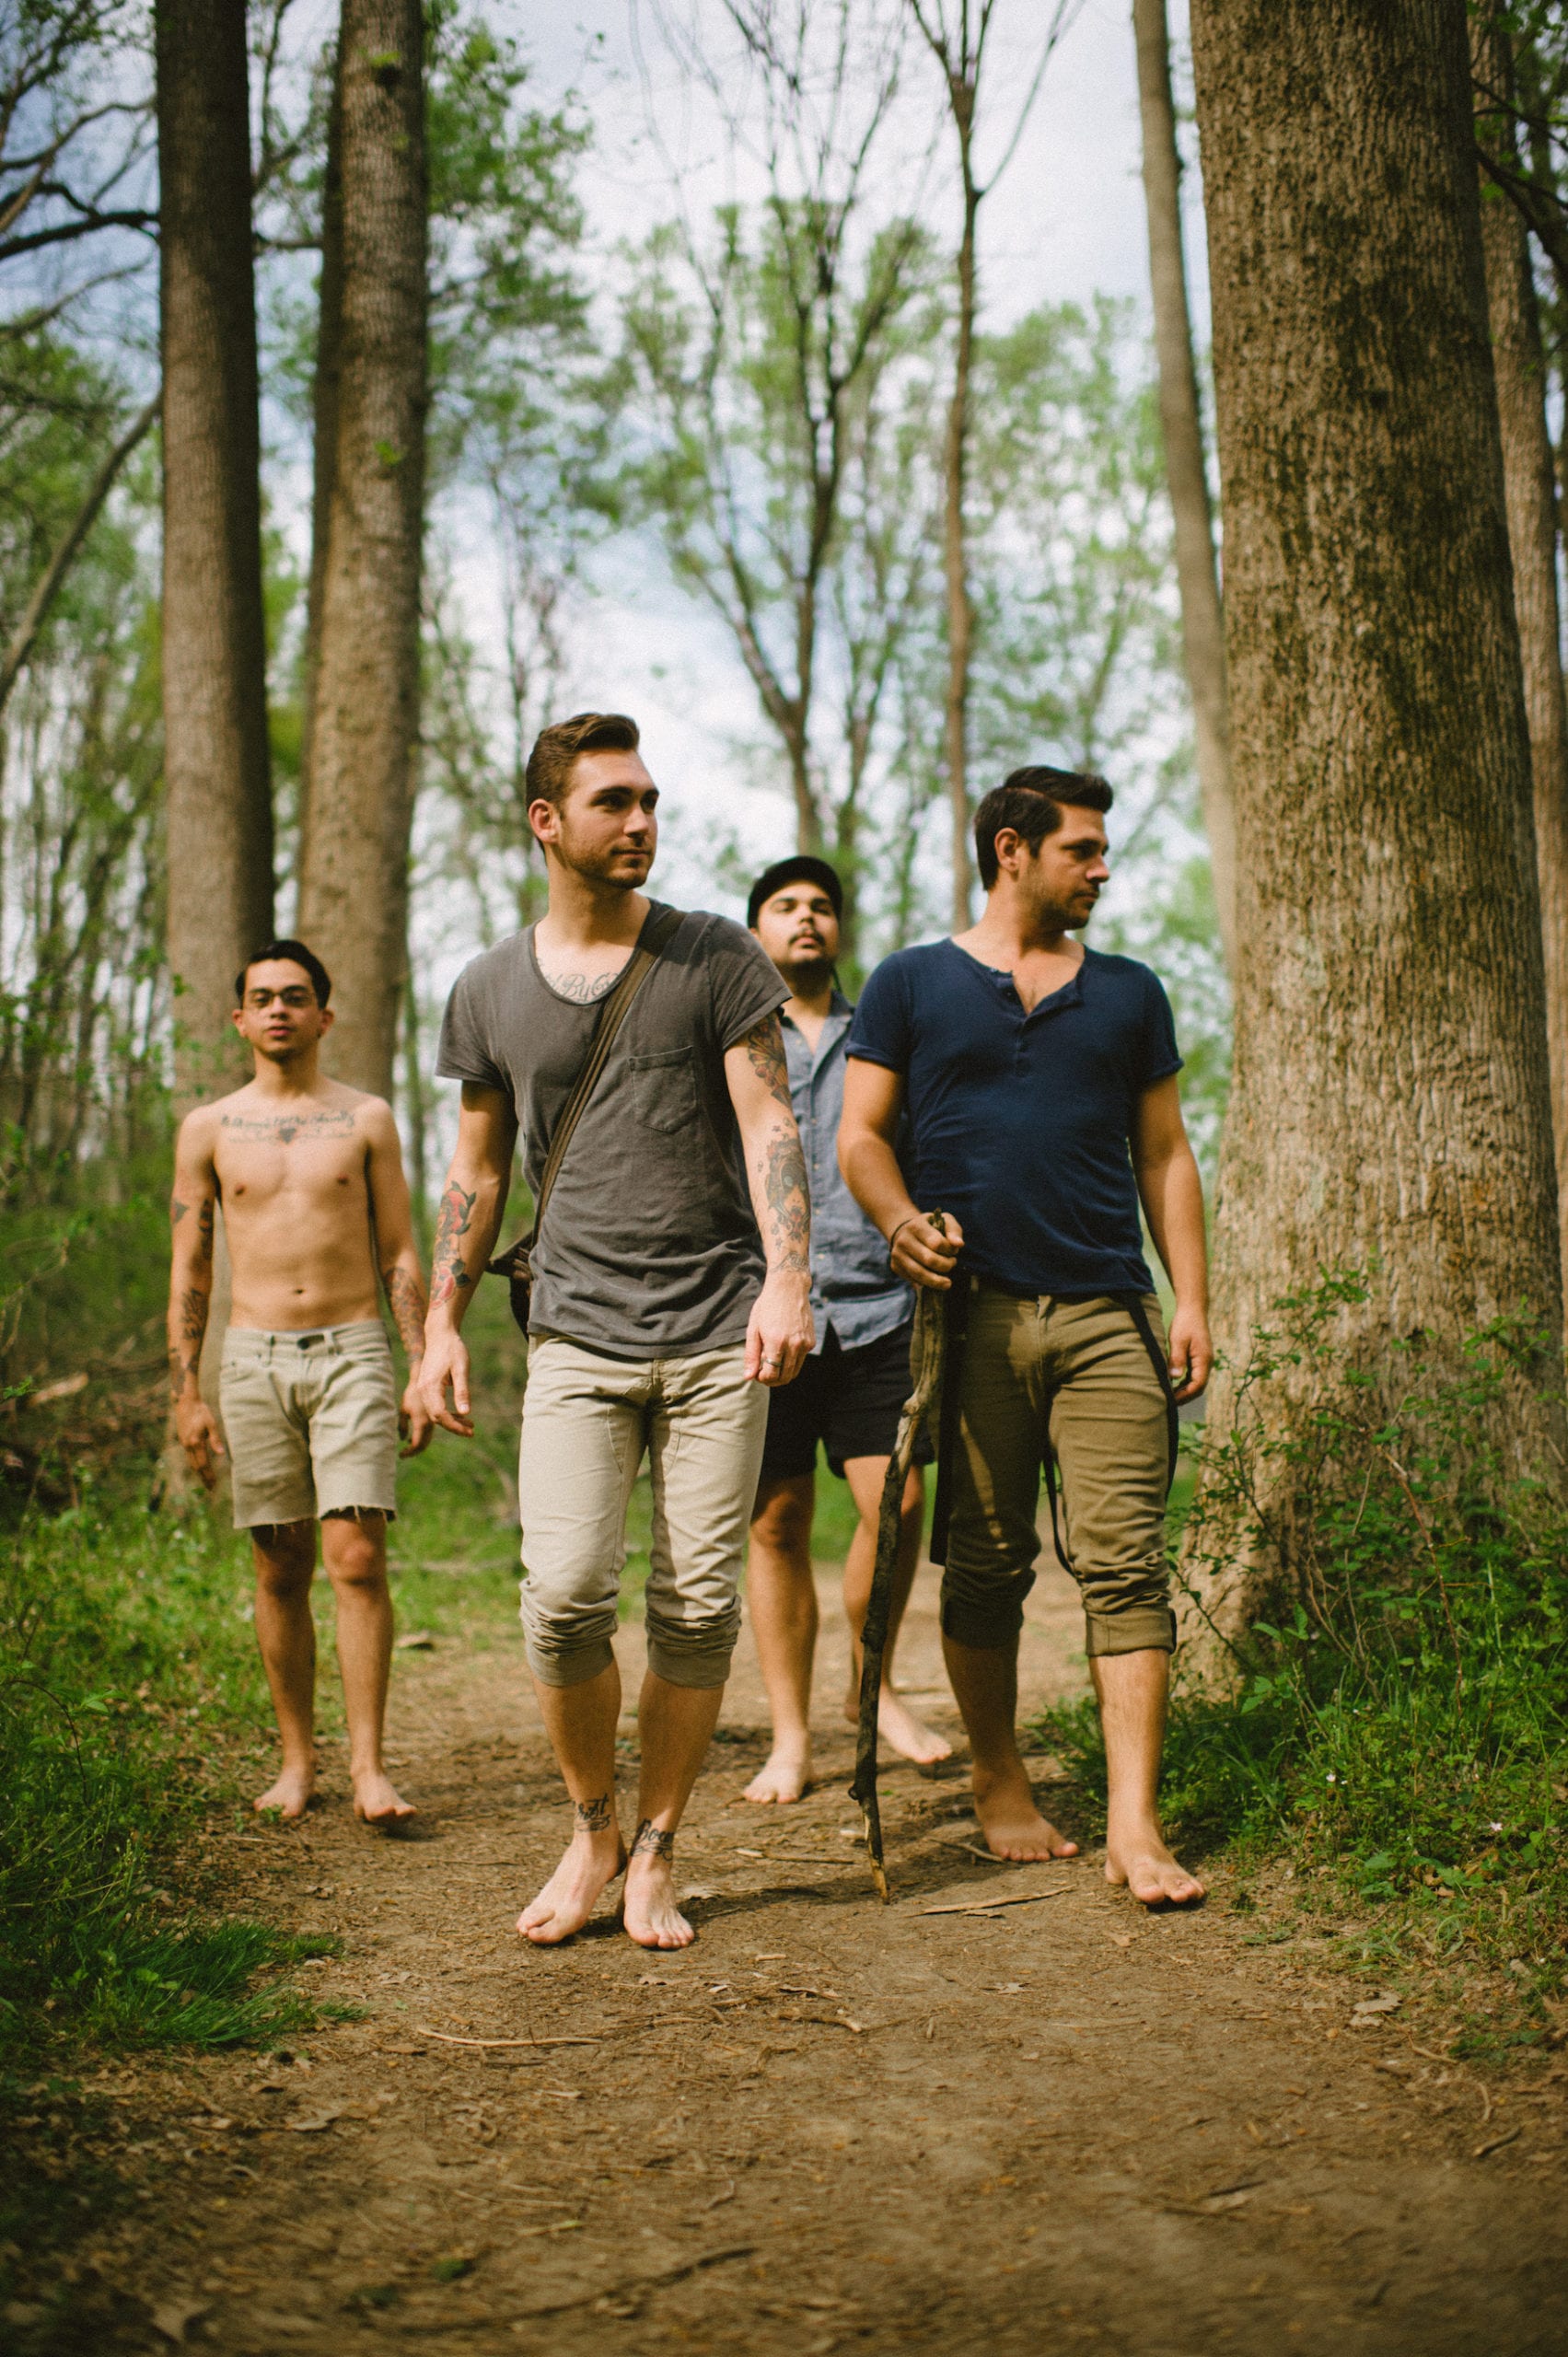 Four males walking in the forest on a sunny day. One is shirtless with tattoos on arms and chest. Two males are looking ahead into the distance while the other two are looking to their left.